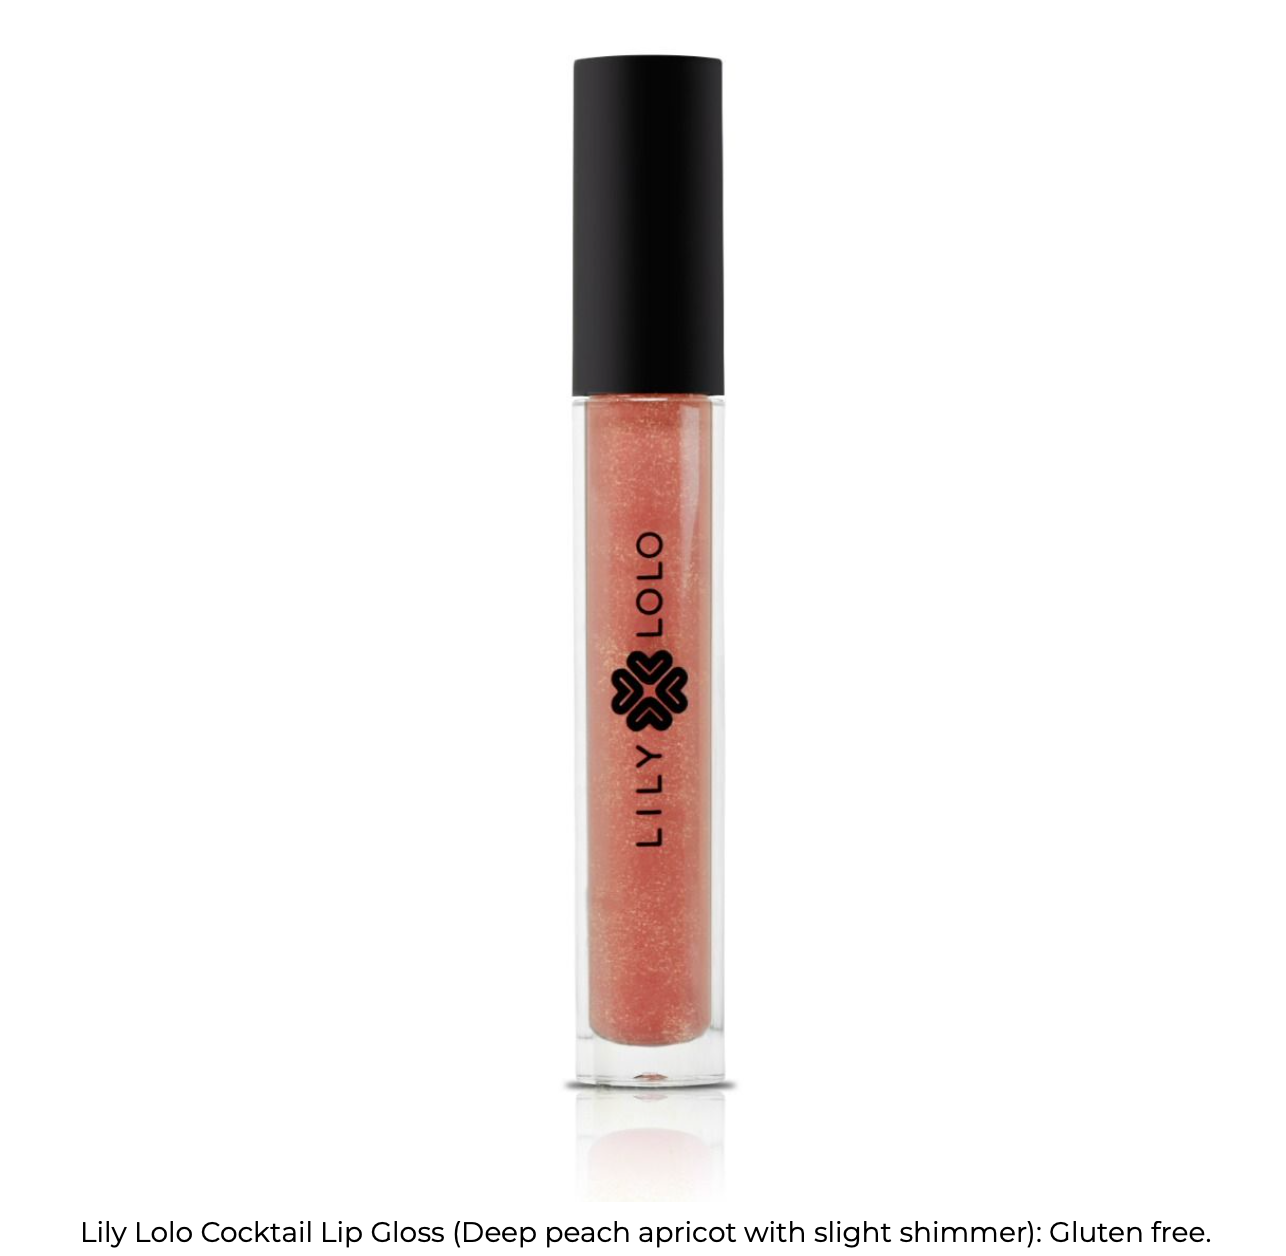 LILY LOLO LIP GLOSS COCKTAIL